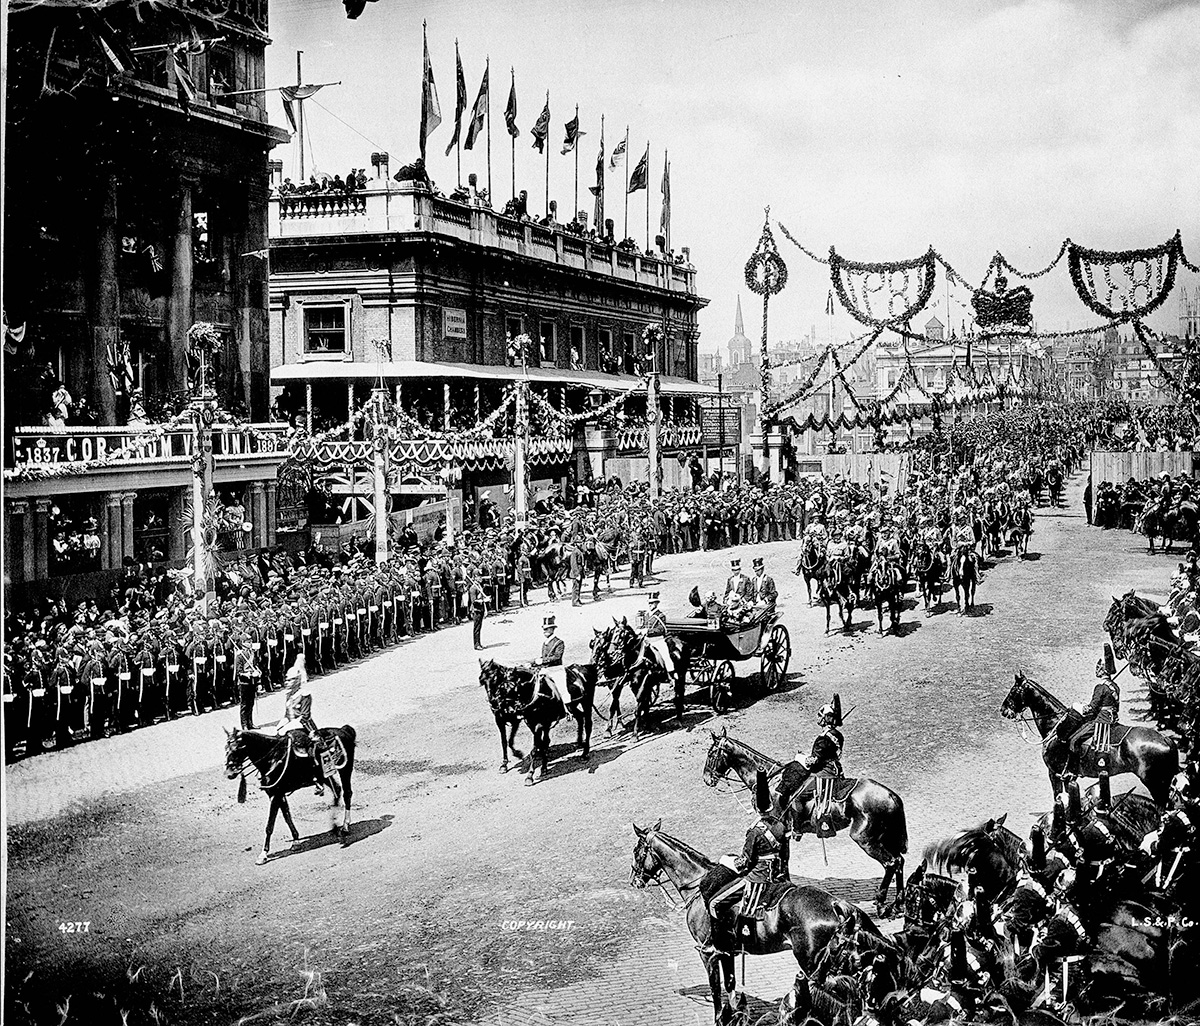 A black and white image of a parade.